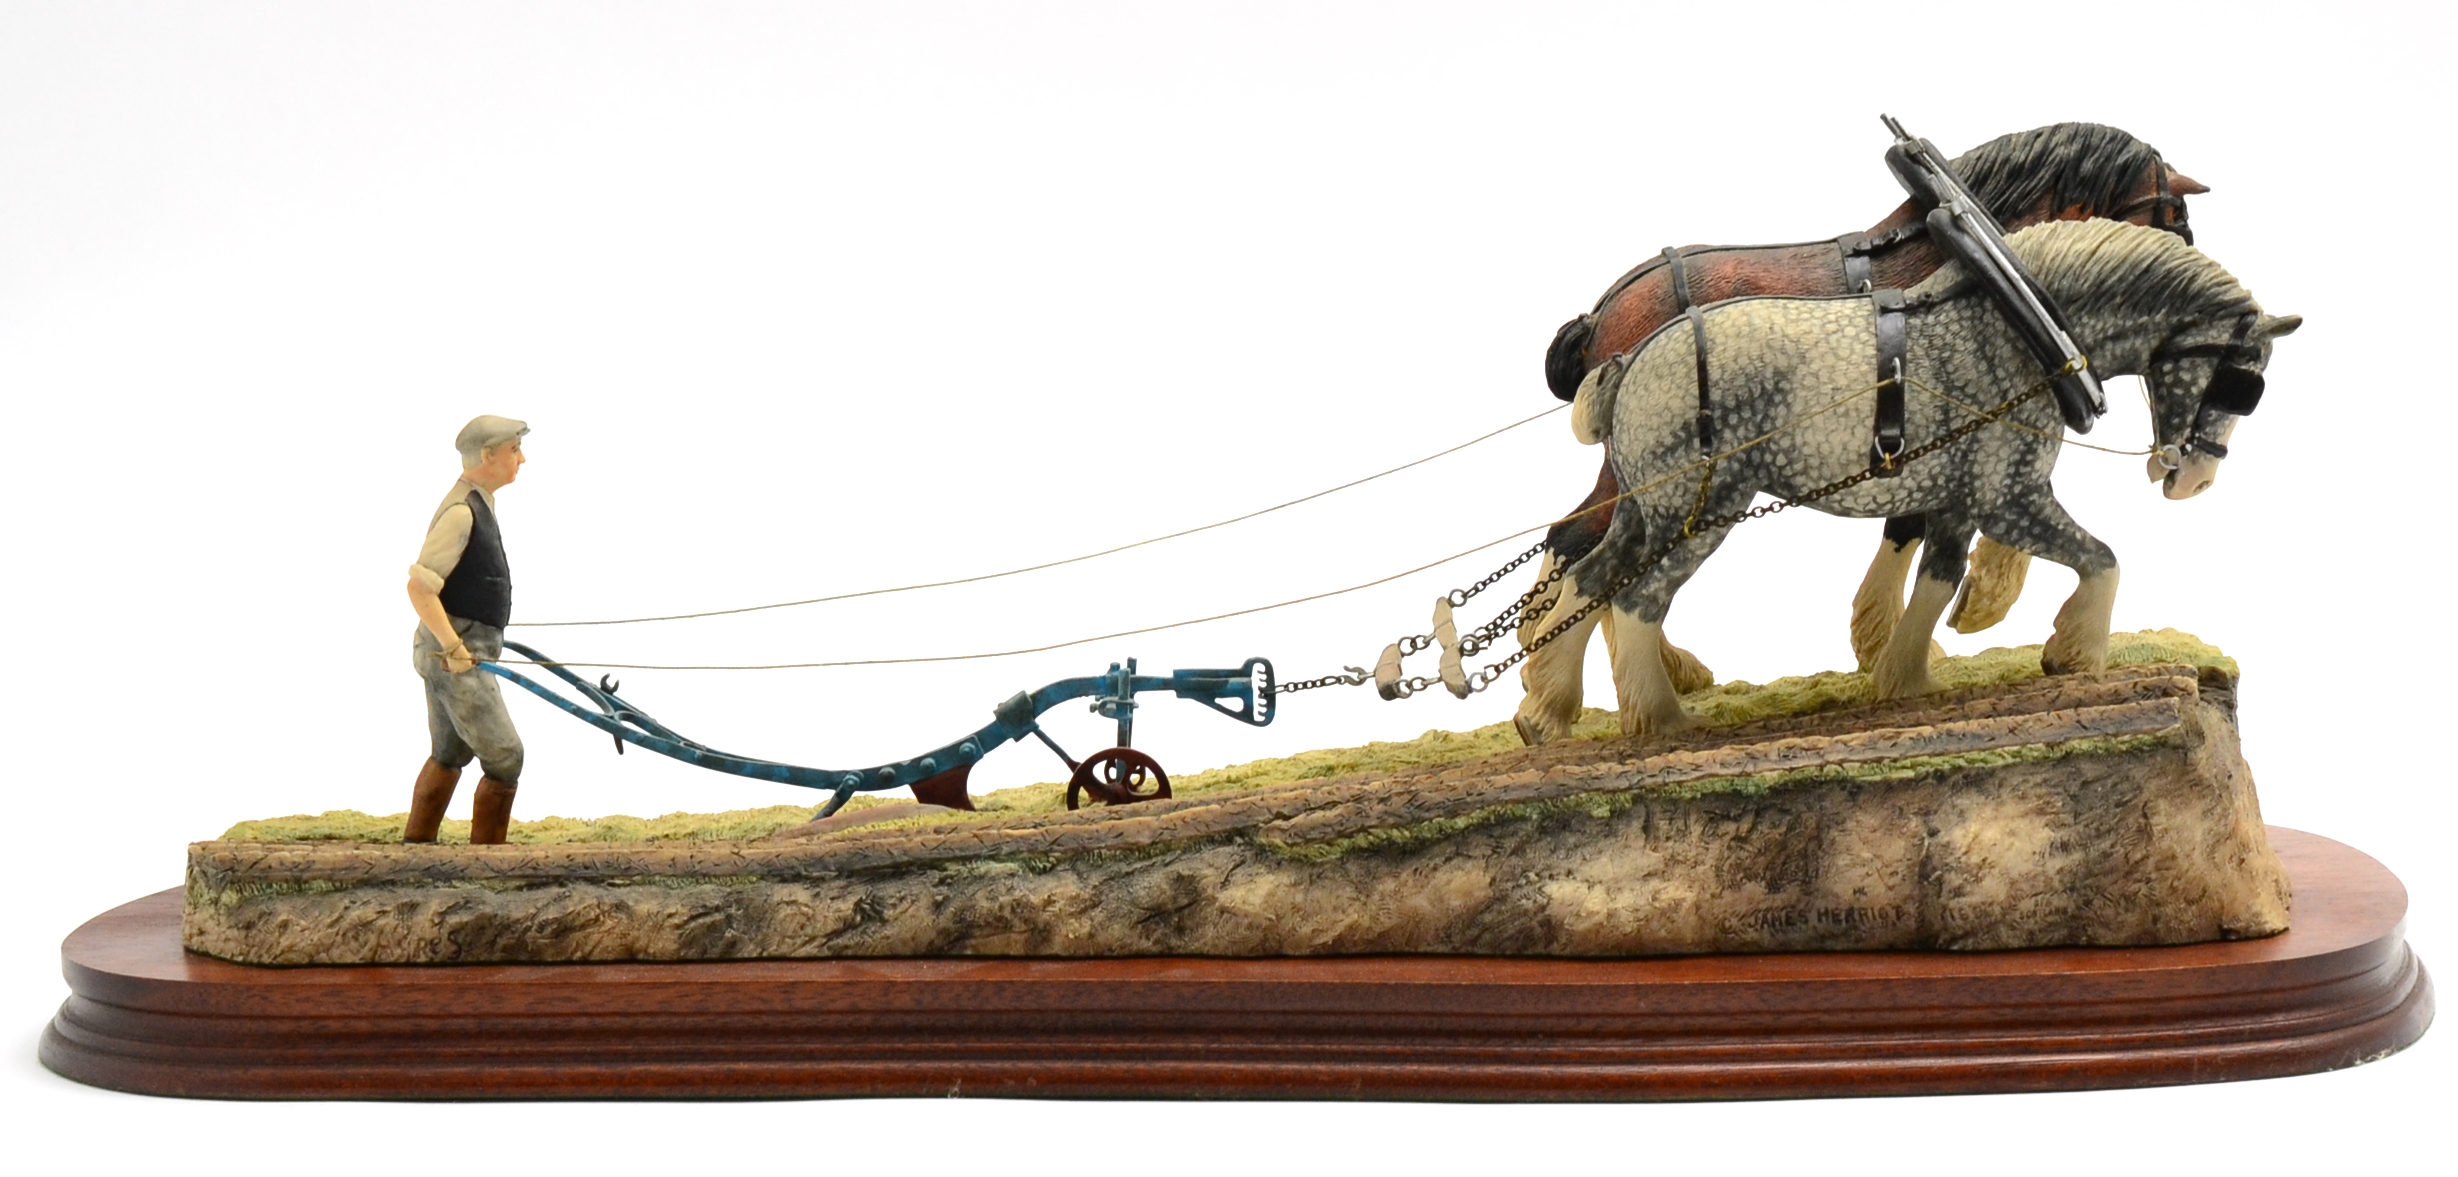 Border Fine Arts 'Stout Hearts' (Ploughing Scene), model No. JH34 by Ray Ayres, on wood base